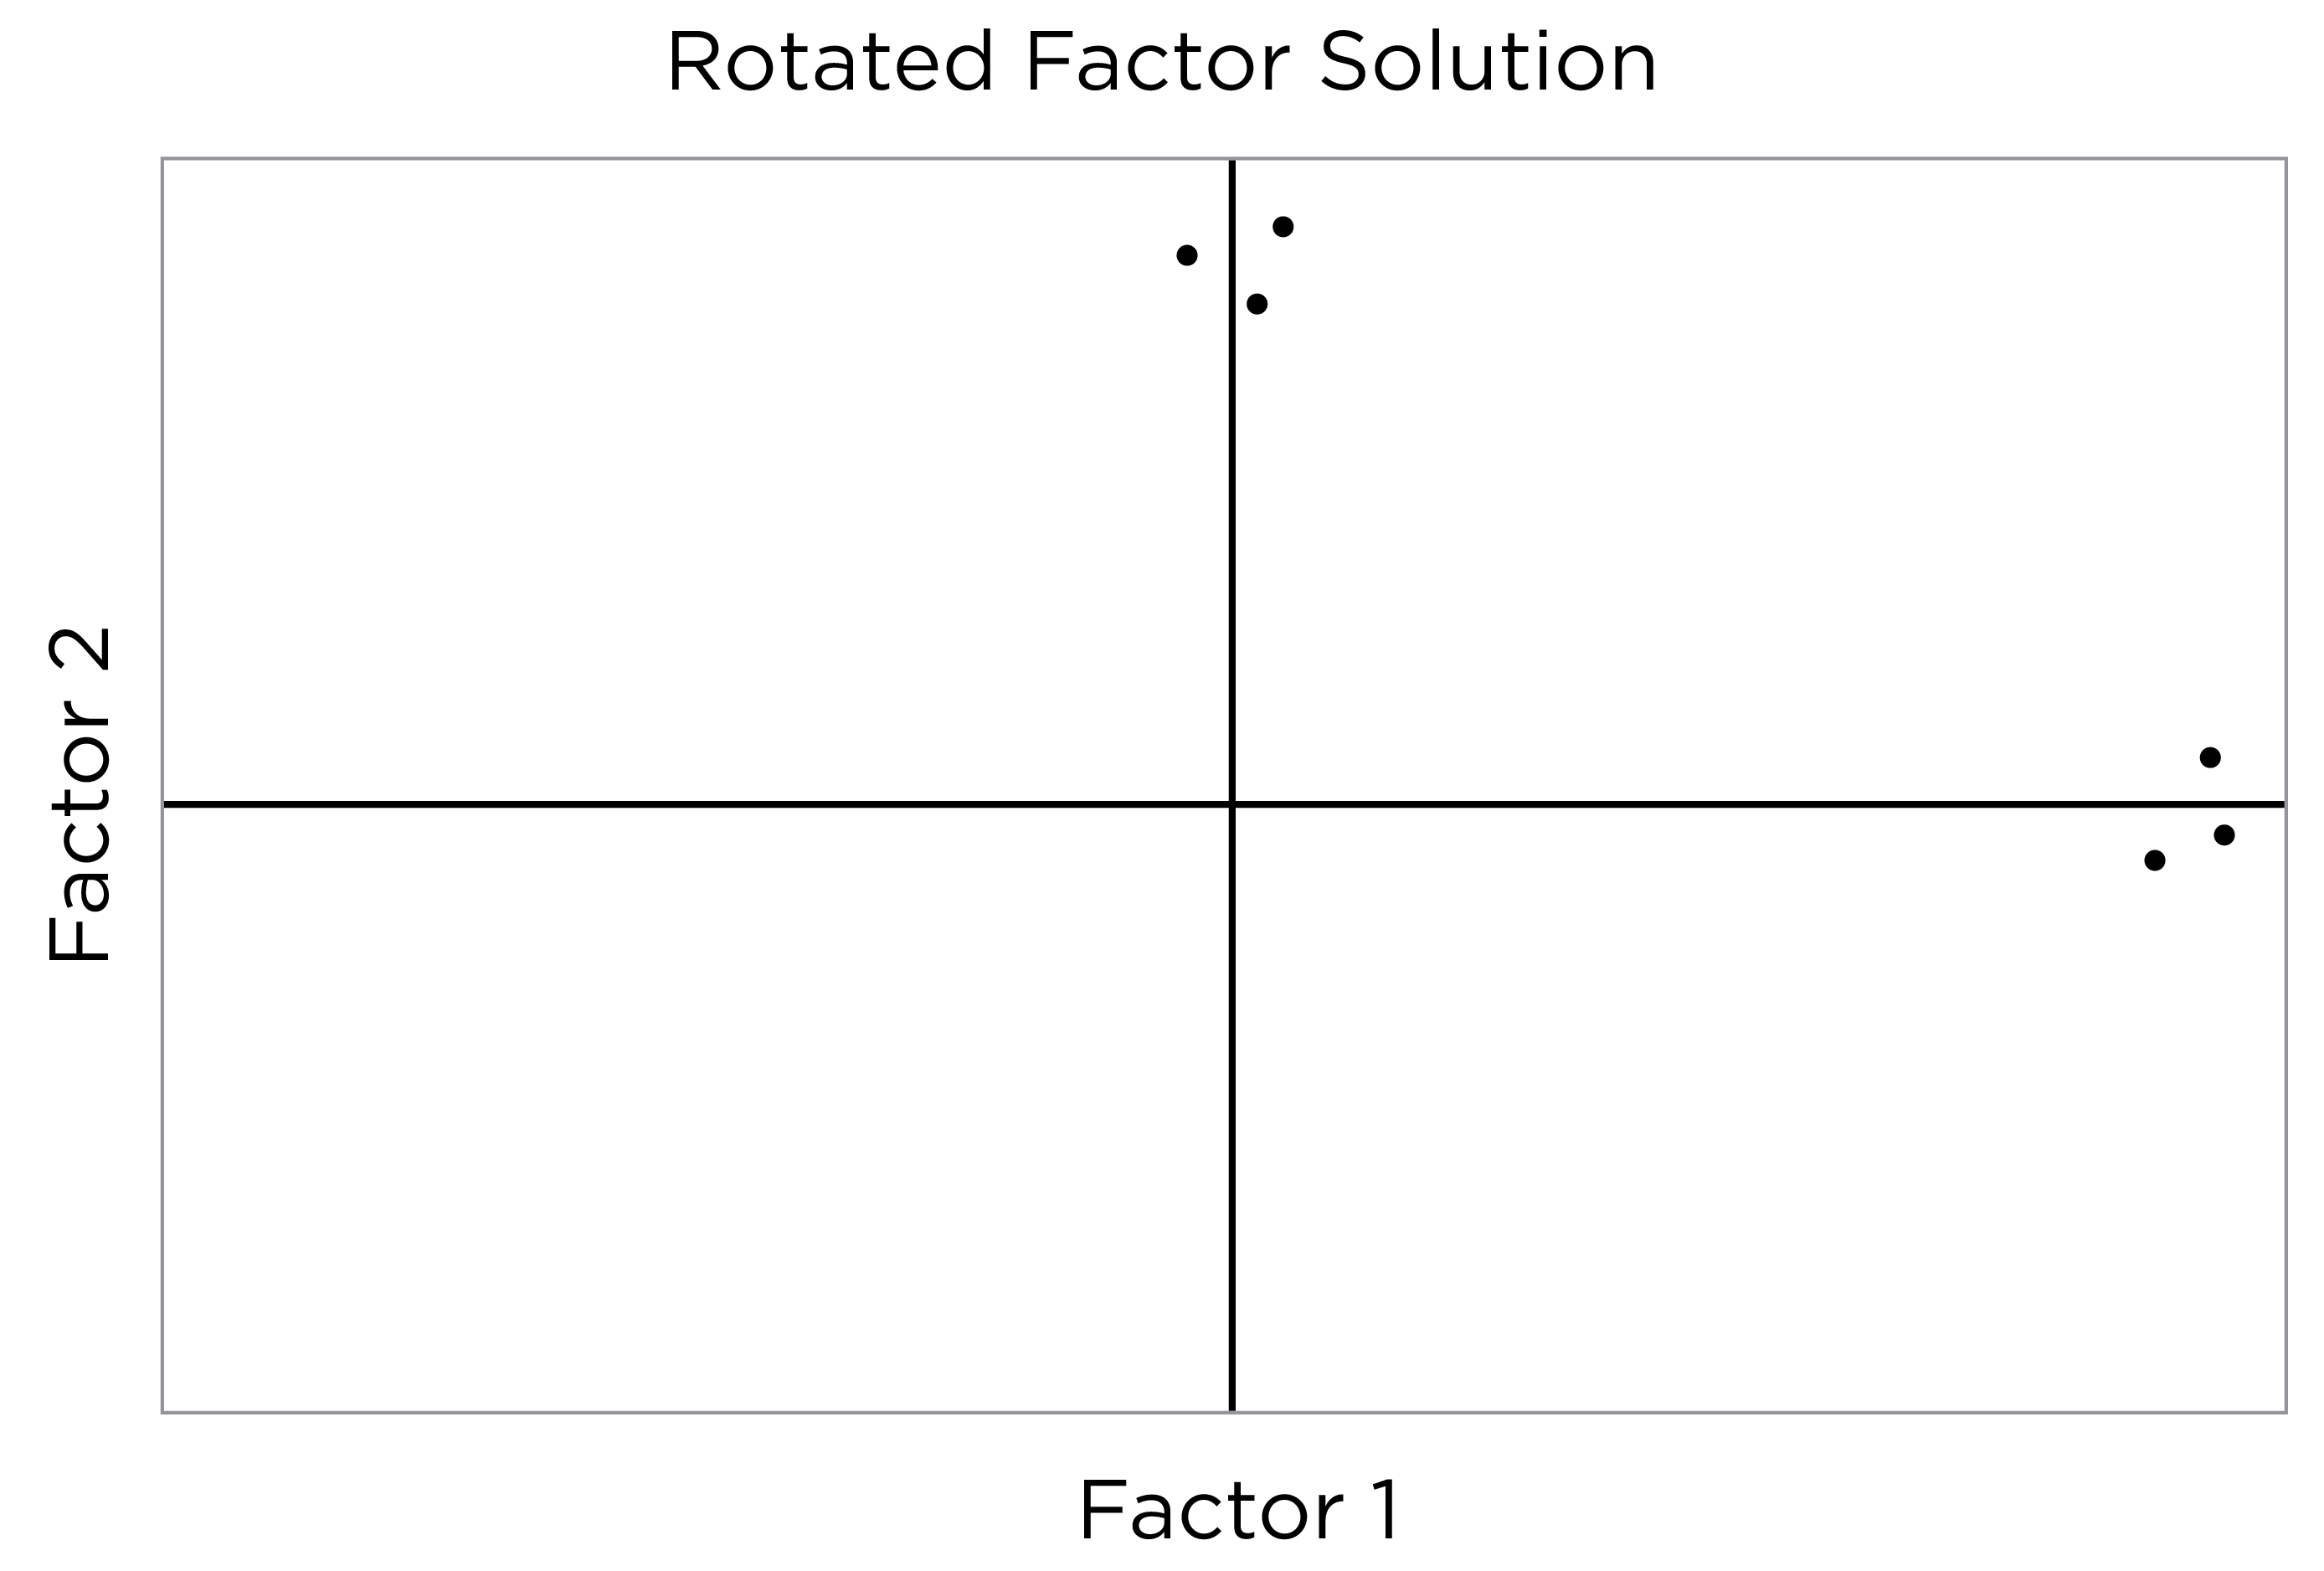 Example of a Rotated Factor Solution.